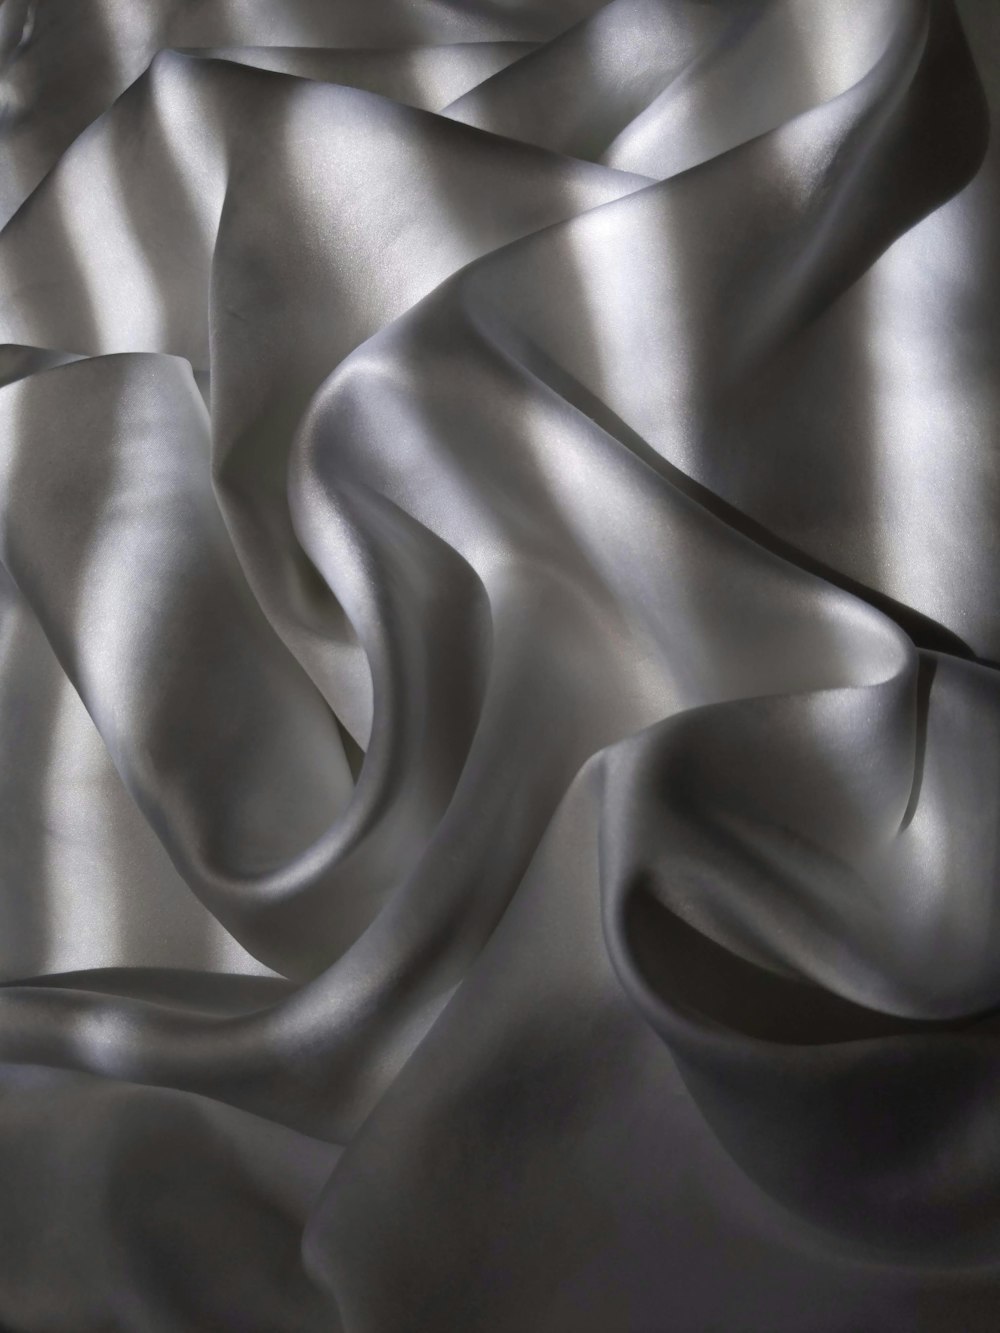 a close up view of a silver fabric